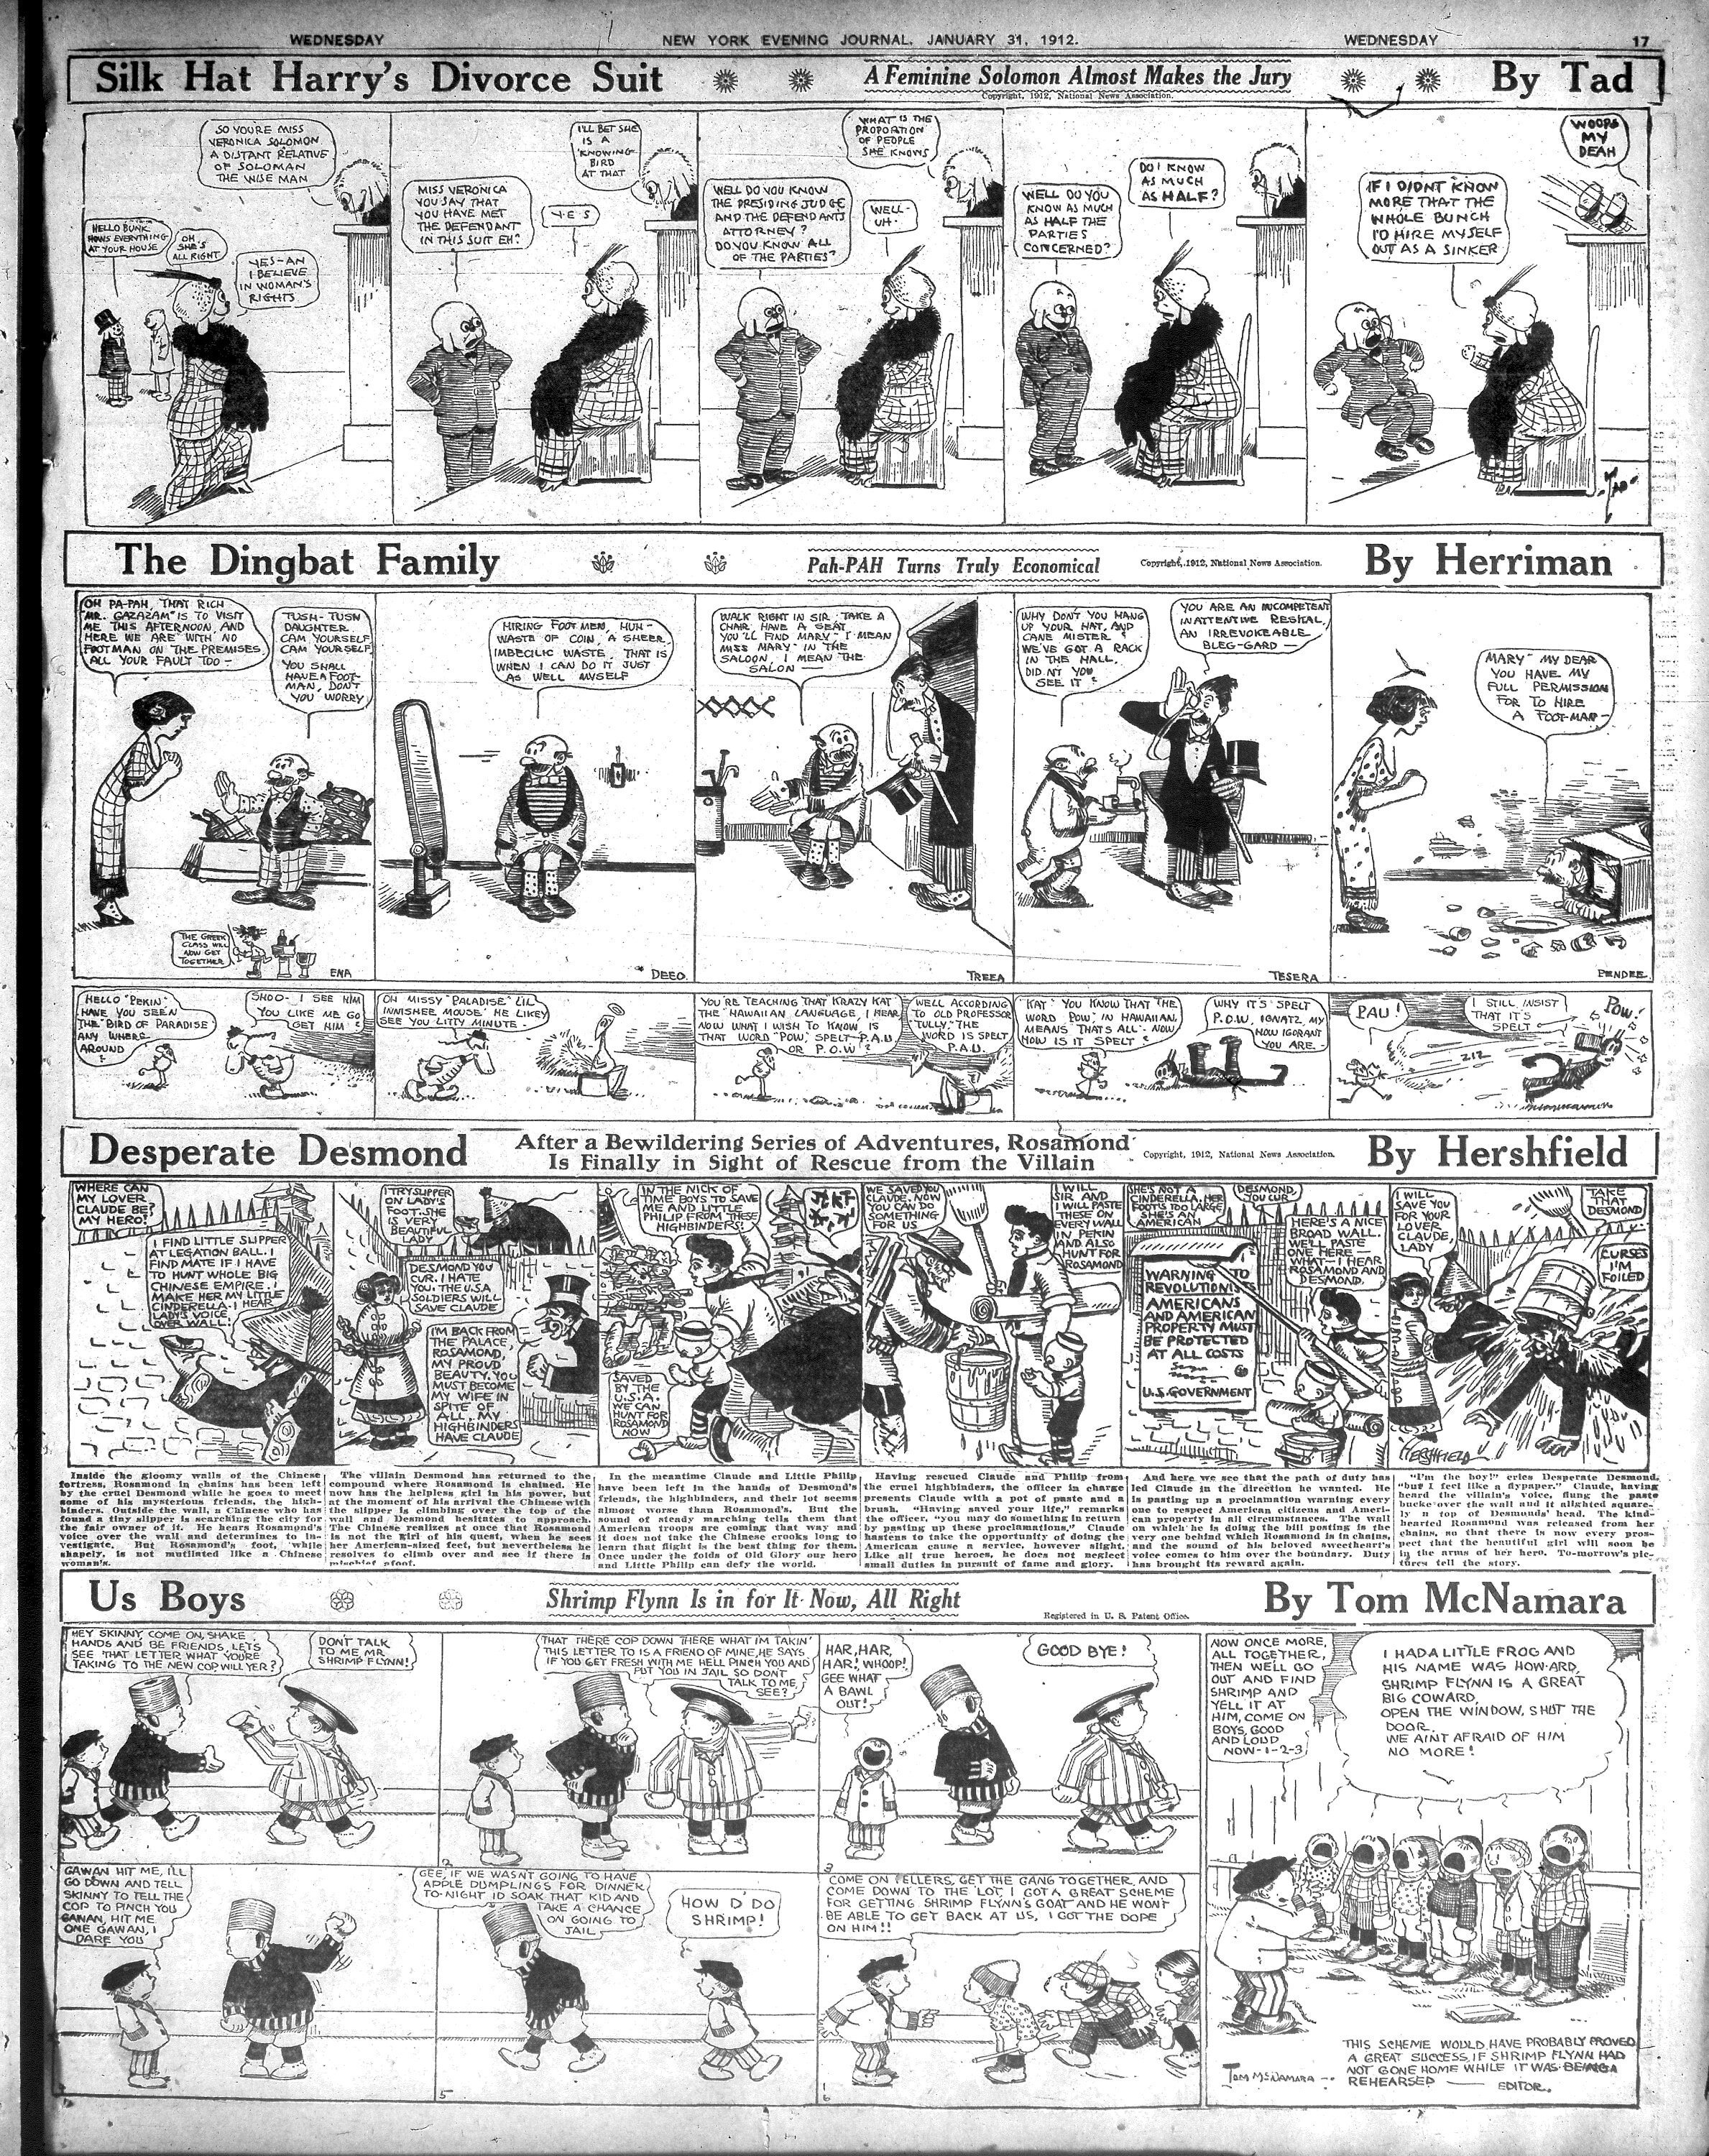 12-nyej-01-31-1912-first-evening-journal-daily-comics-page.jpg